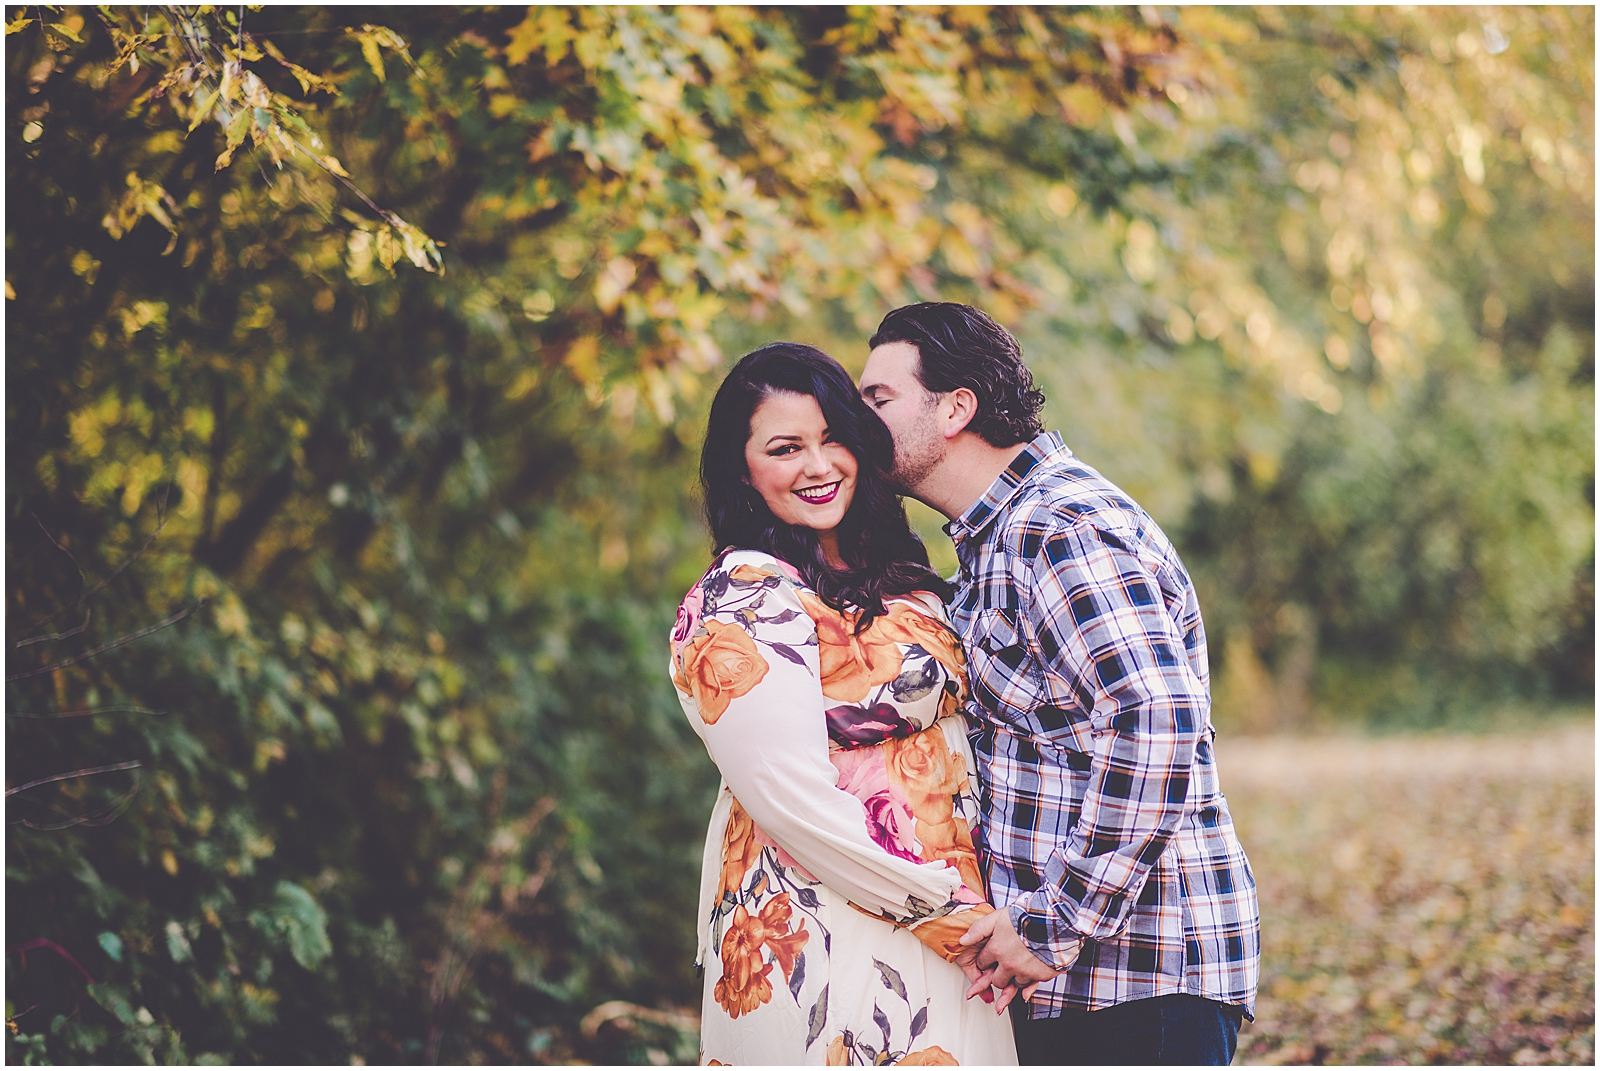 Fall mini sessions at Perry Farm Park in Bradley, Illinois with Chicagoland wedding photographer Kara Evans Photographer.